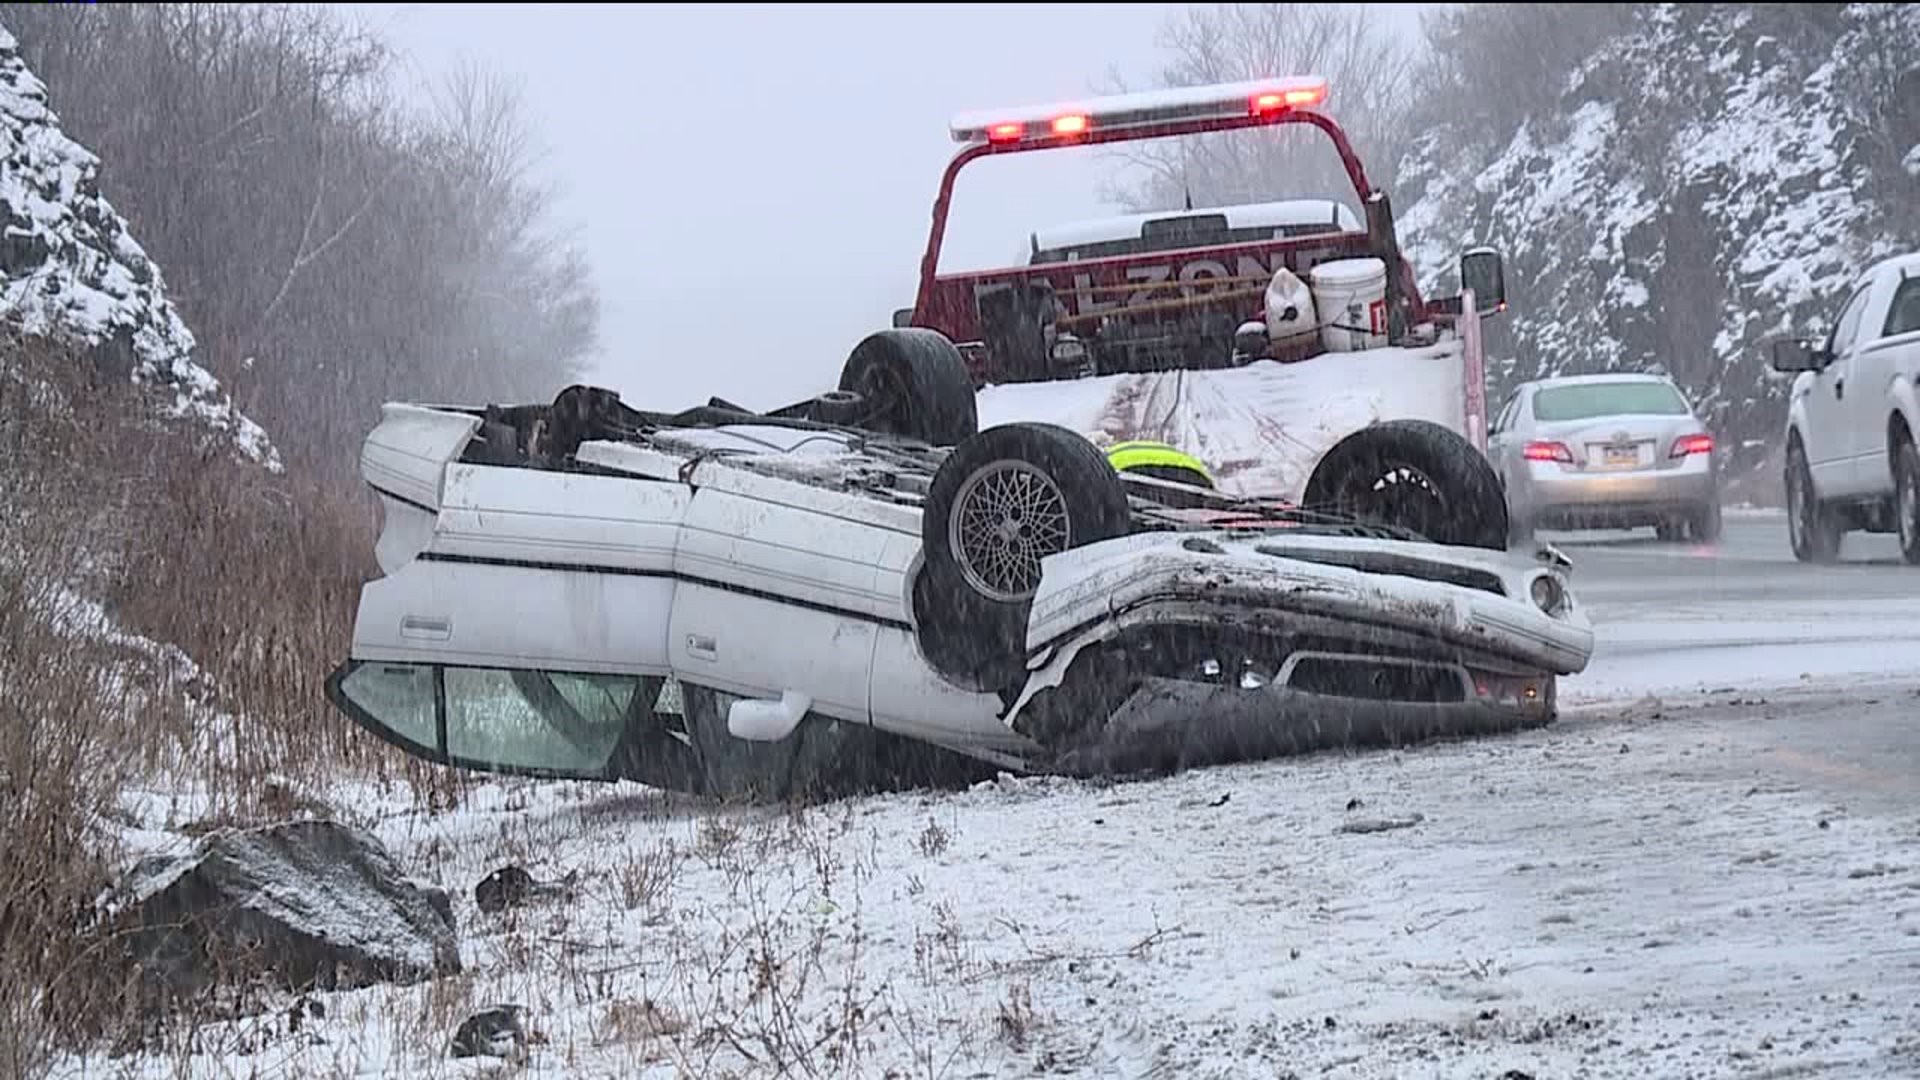 Snowy Conditions Lead to Rollover Crash in Luzerne County